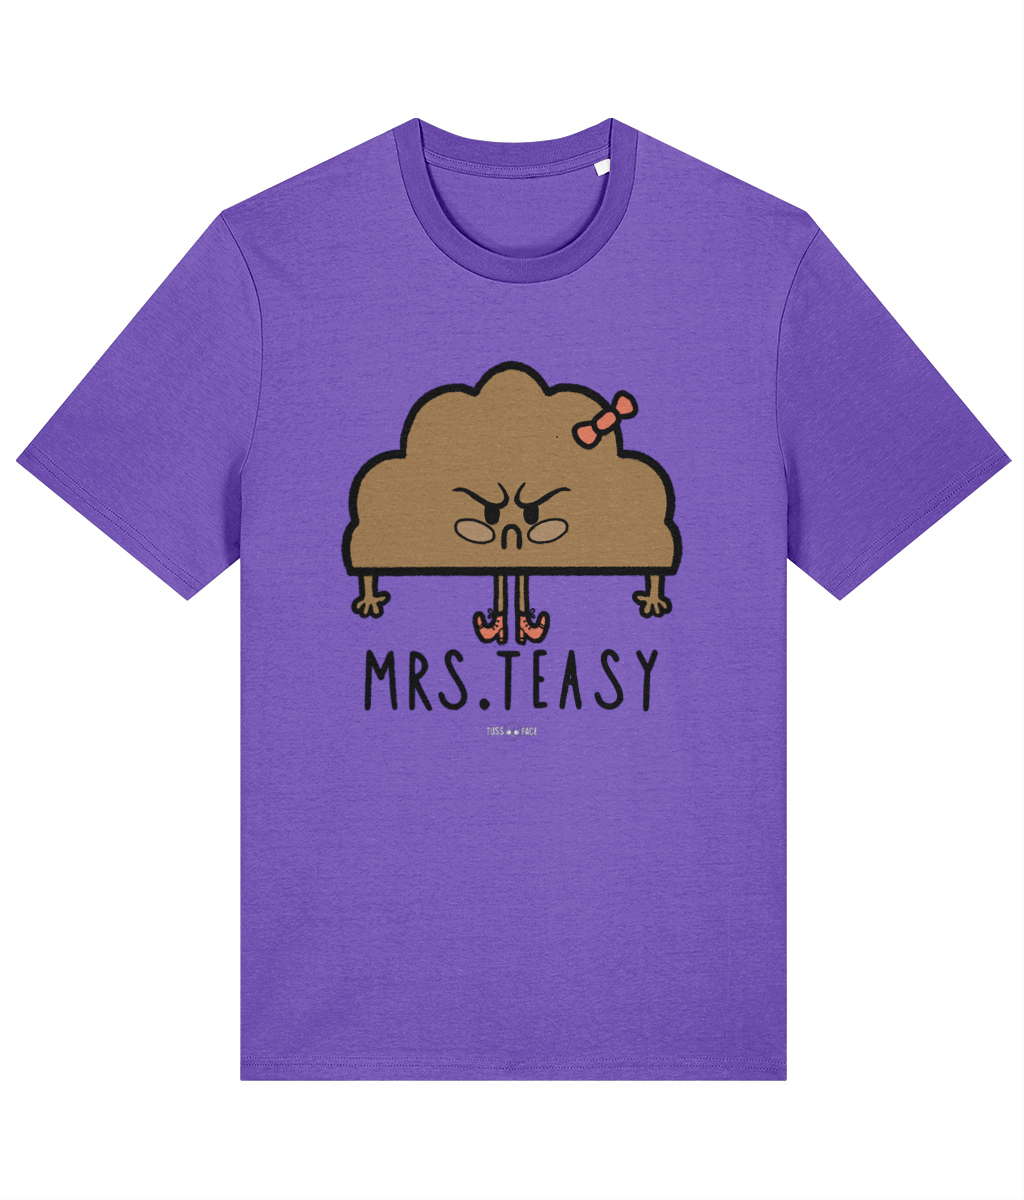 Mrs.Teasy - Cornish dialect Tussface T-shirt